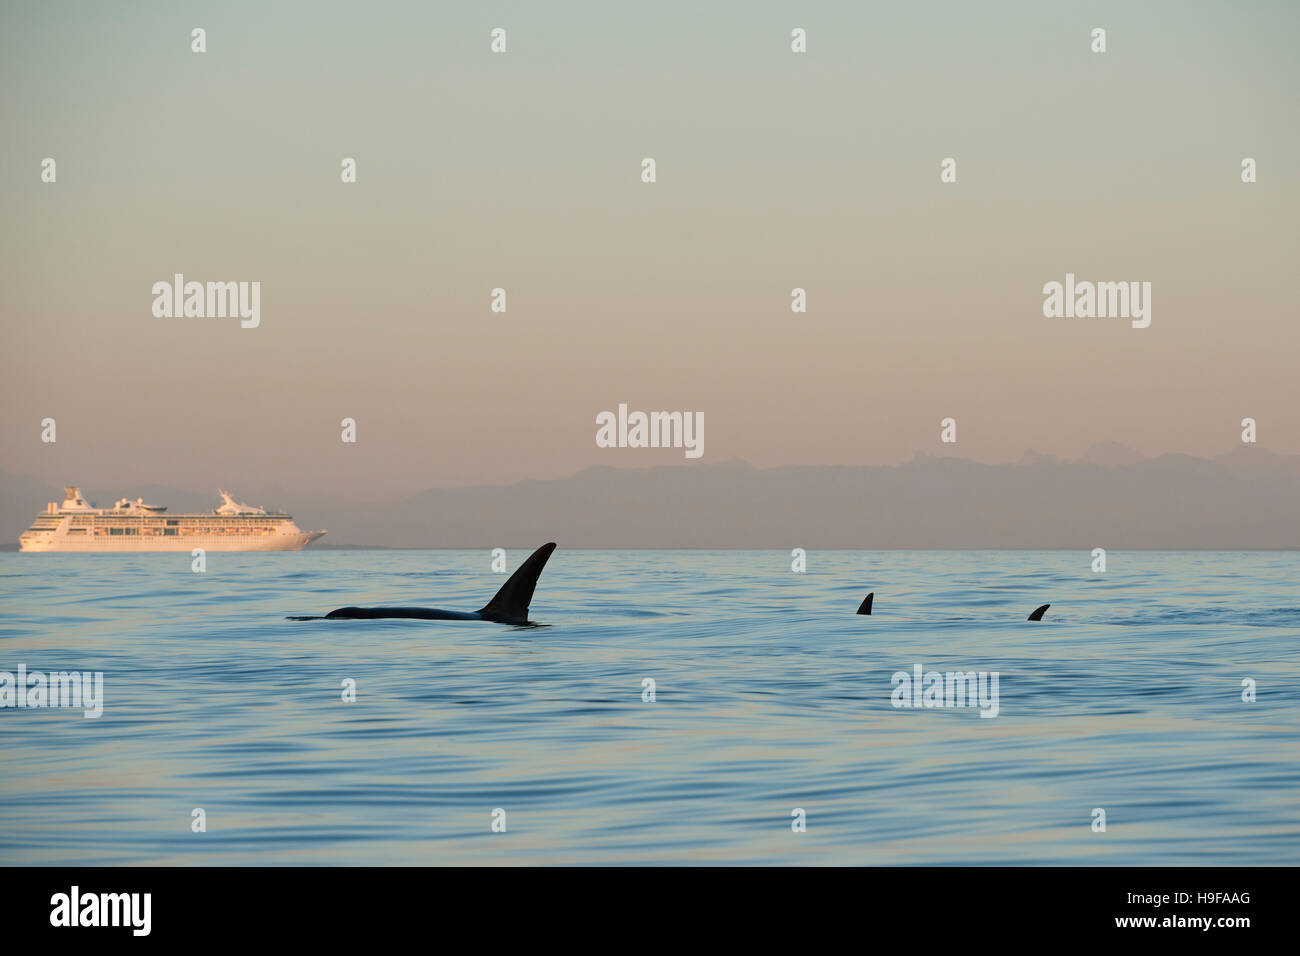 transient orcas or killer whales, Orcinus orca, swim past a cruise ship in the Strait of George, off Vancouver Island, Canada Stock Photo